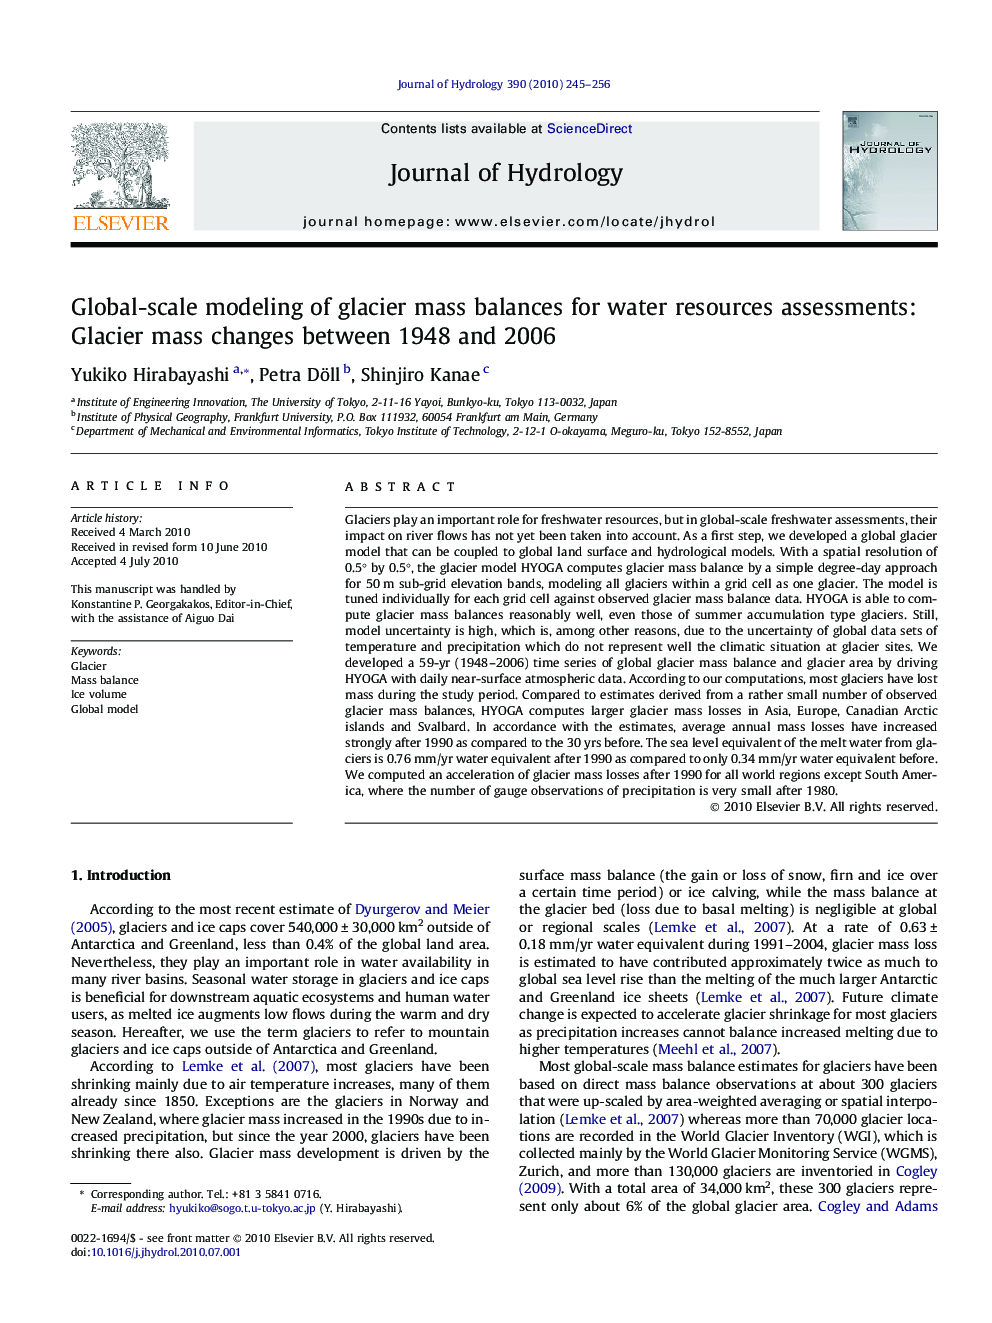 Global-scale modeling of glacier mass balances for water resources assessments: Glacier mass changes between 1948 and 2006